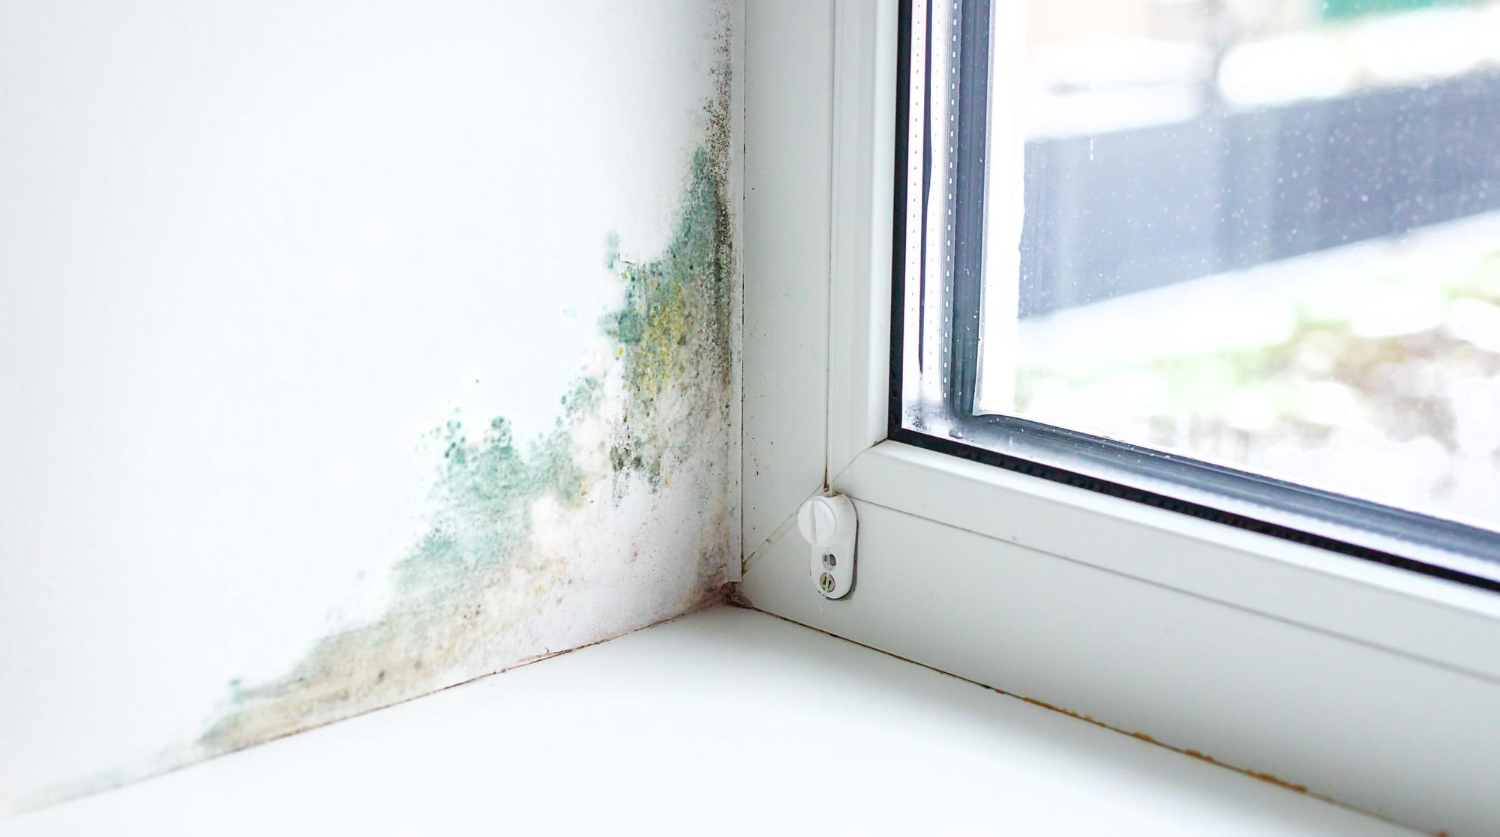 What You Should Know About Damp Patches on Your Ceiling- Causes and Solutions